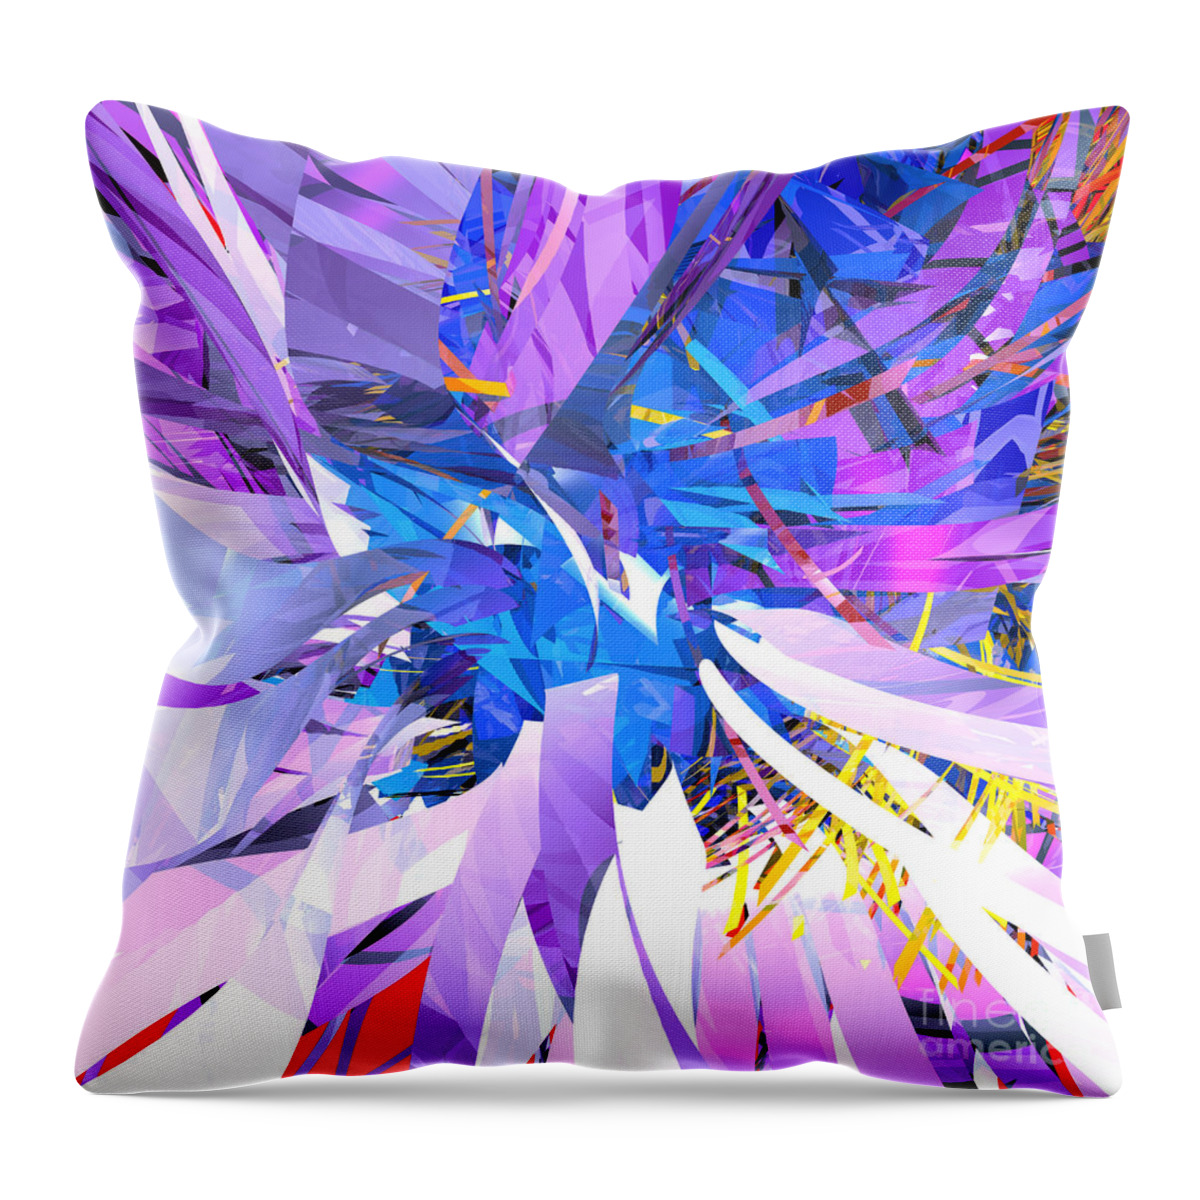 Abstract Throw Pillow featuring the digital art Abstract Curvy 21 by Russell Kightley